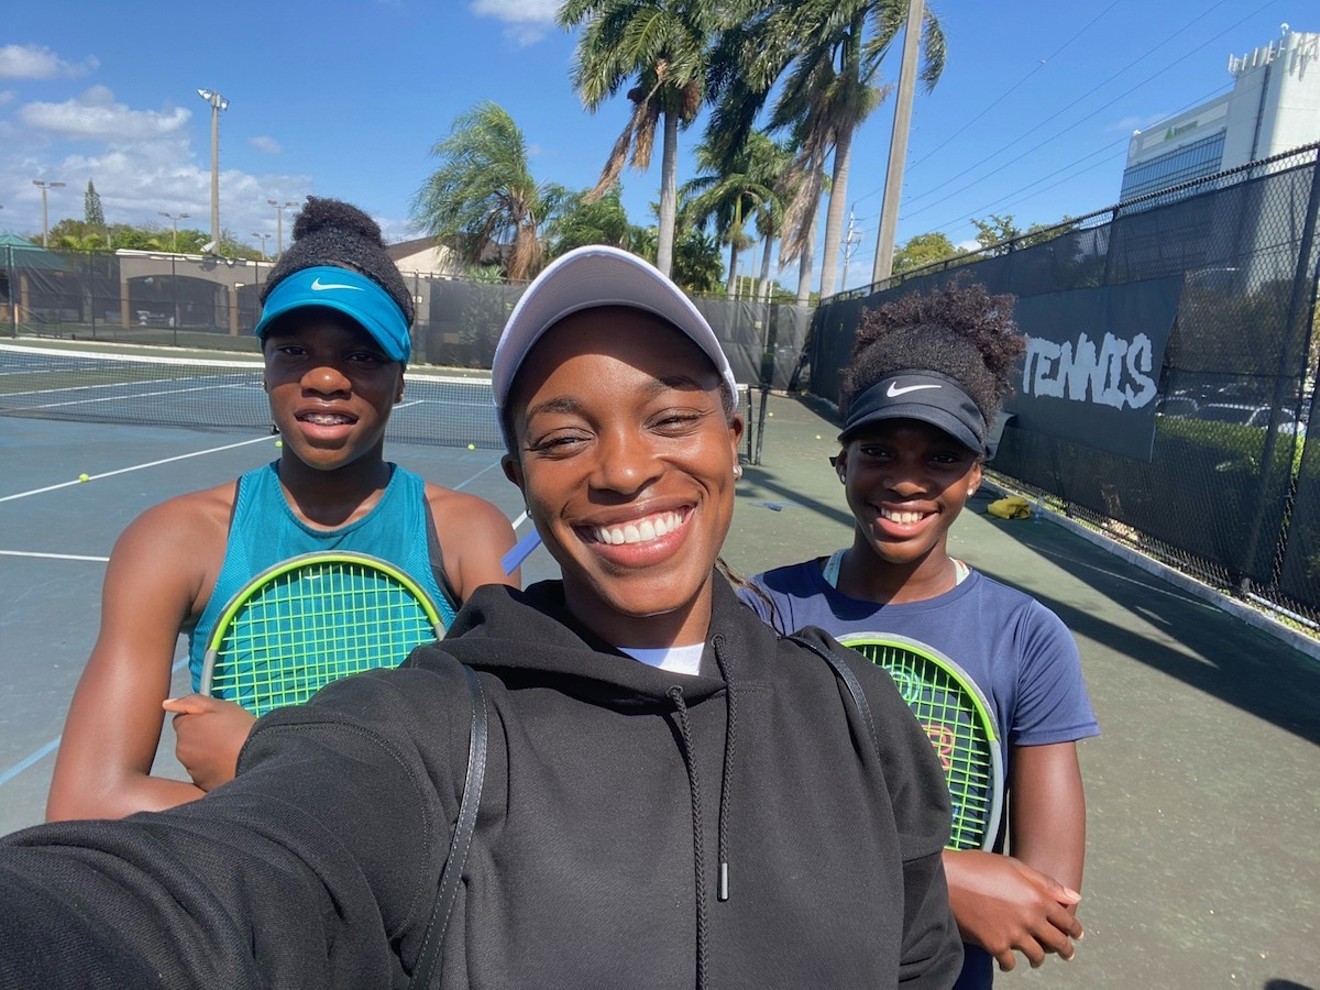 Sloane Stephens with the Samabaly twins, two of the students her foundation is supporting in South Florida.